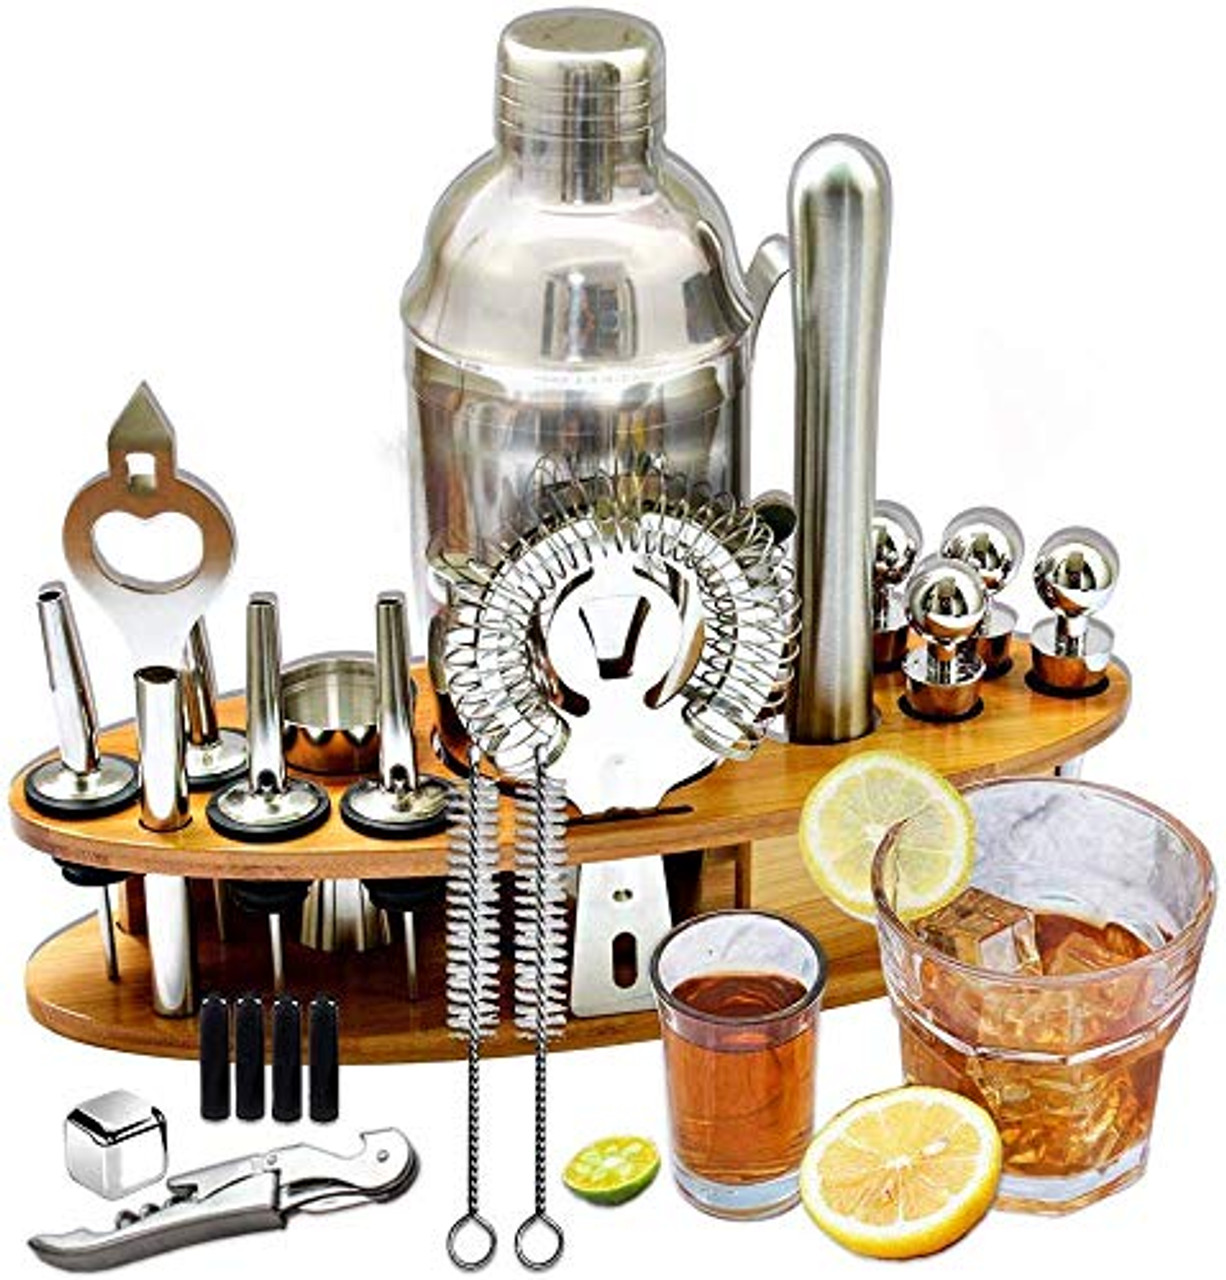 Zulay Kitchen 24 Piece Stainless Steel Bartender Set With BAMBOO STAND-NIB